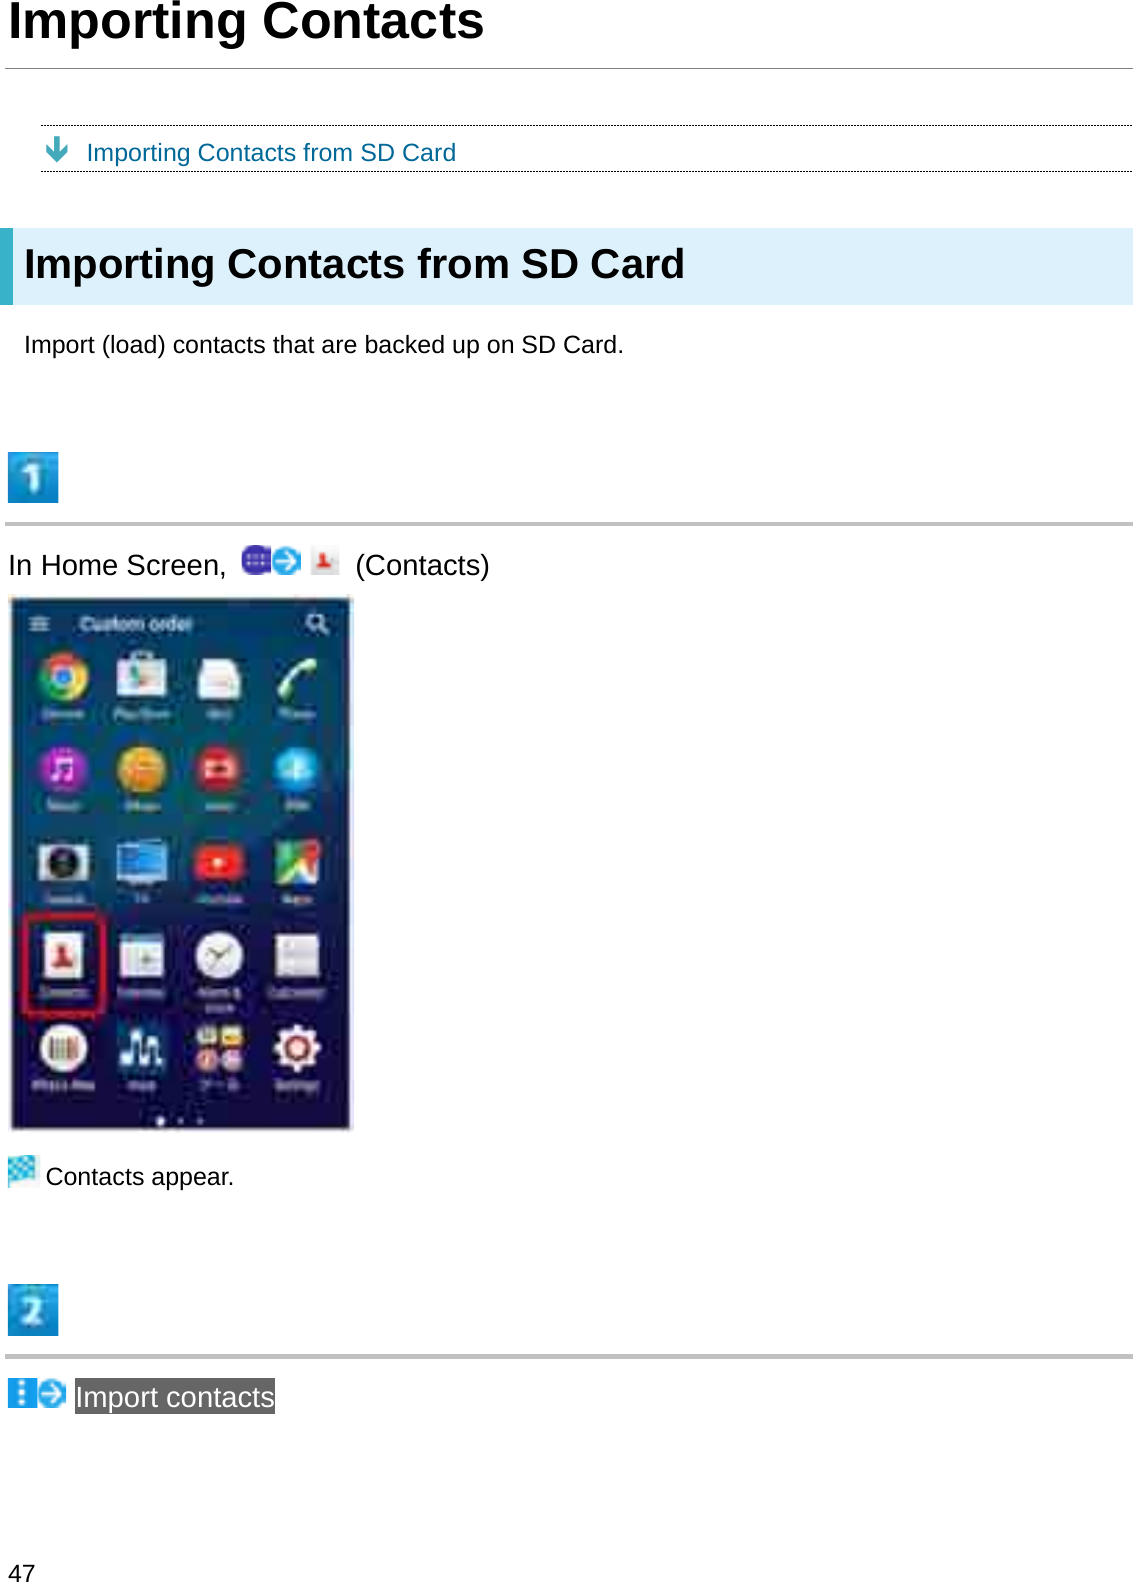 Importing ContactsÐImporting Contacts from SD CardImporting Contacts from SD CardImport (load) contacts that are backed up on SD Card.In Home Screen,  (Contacts)Contacts appear.Import contacts47